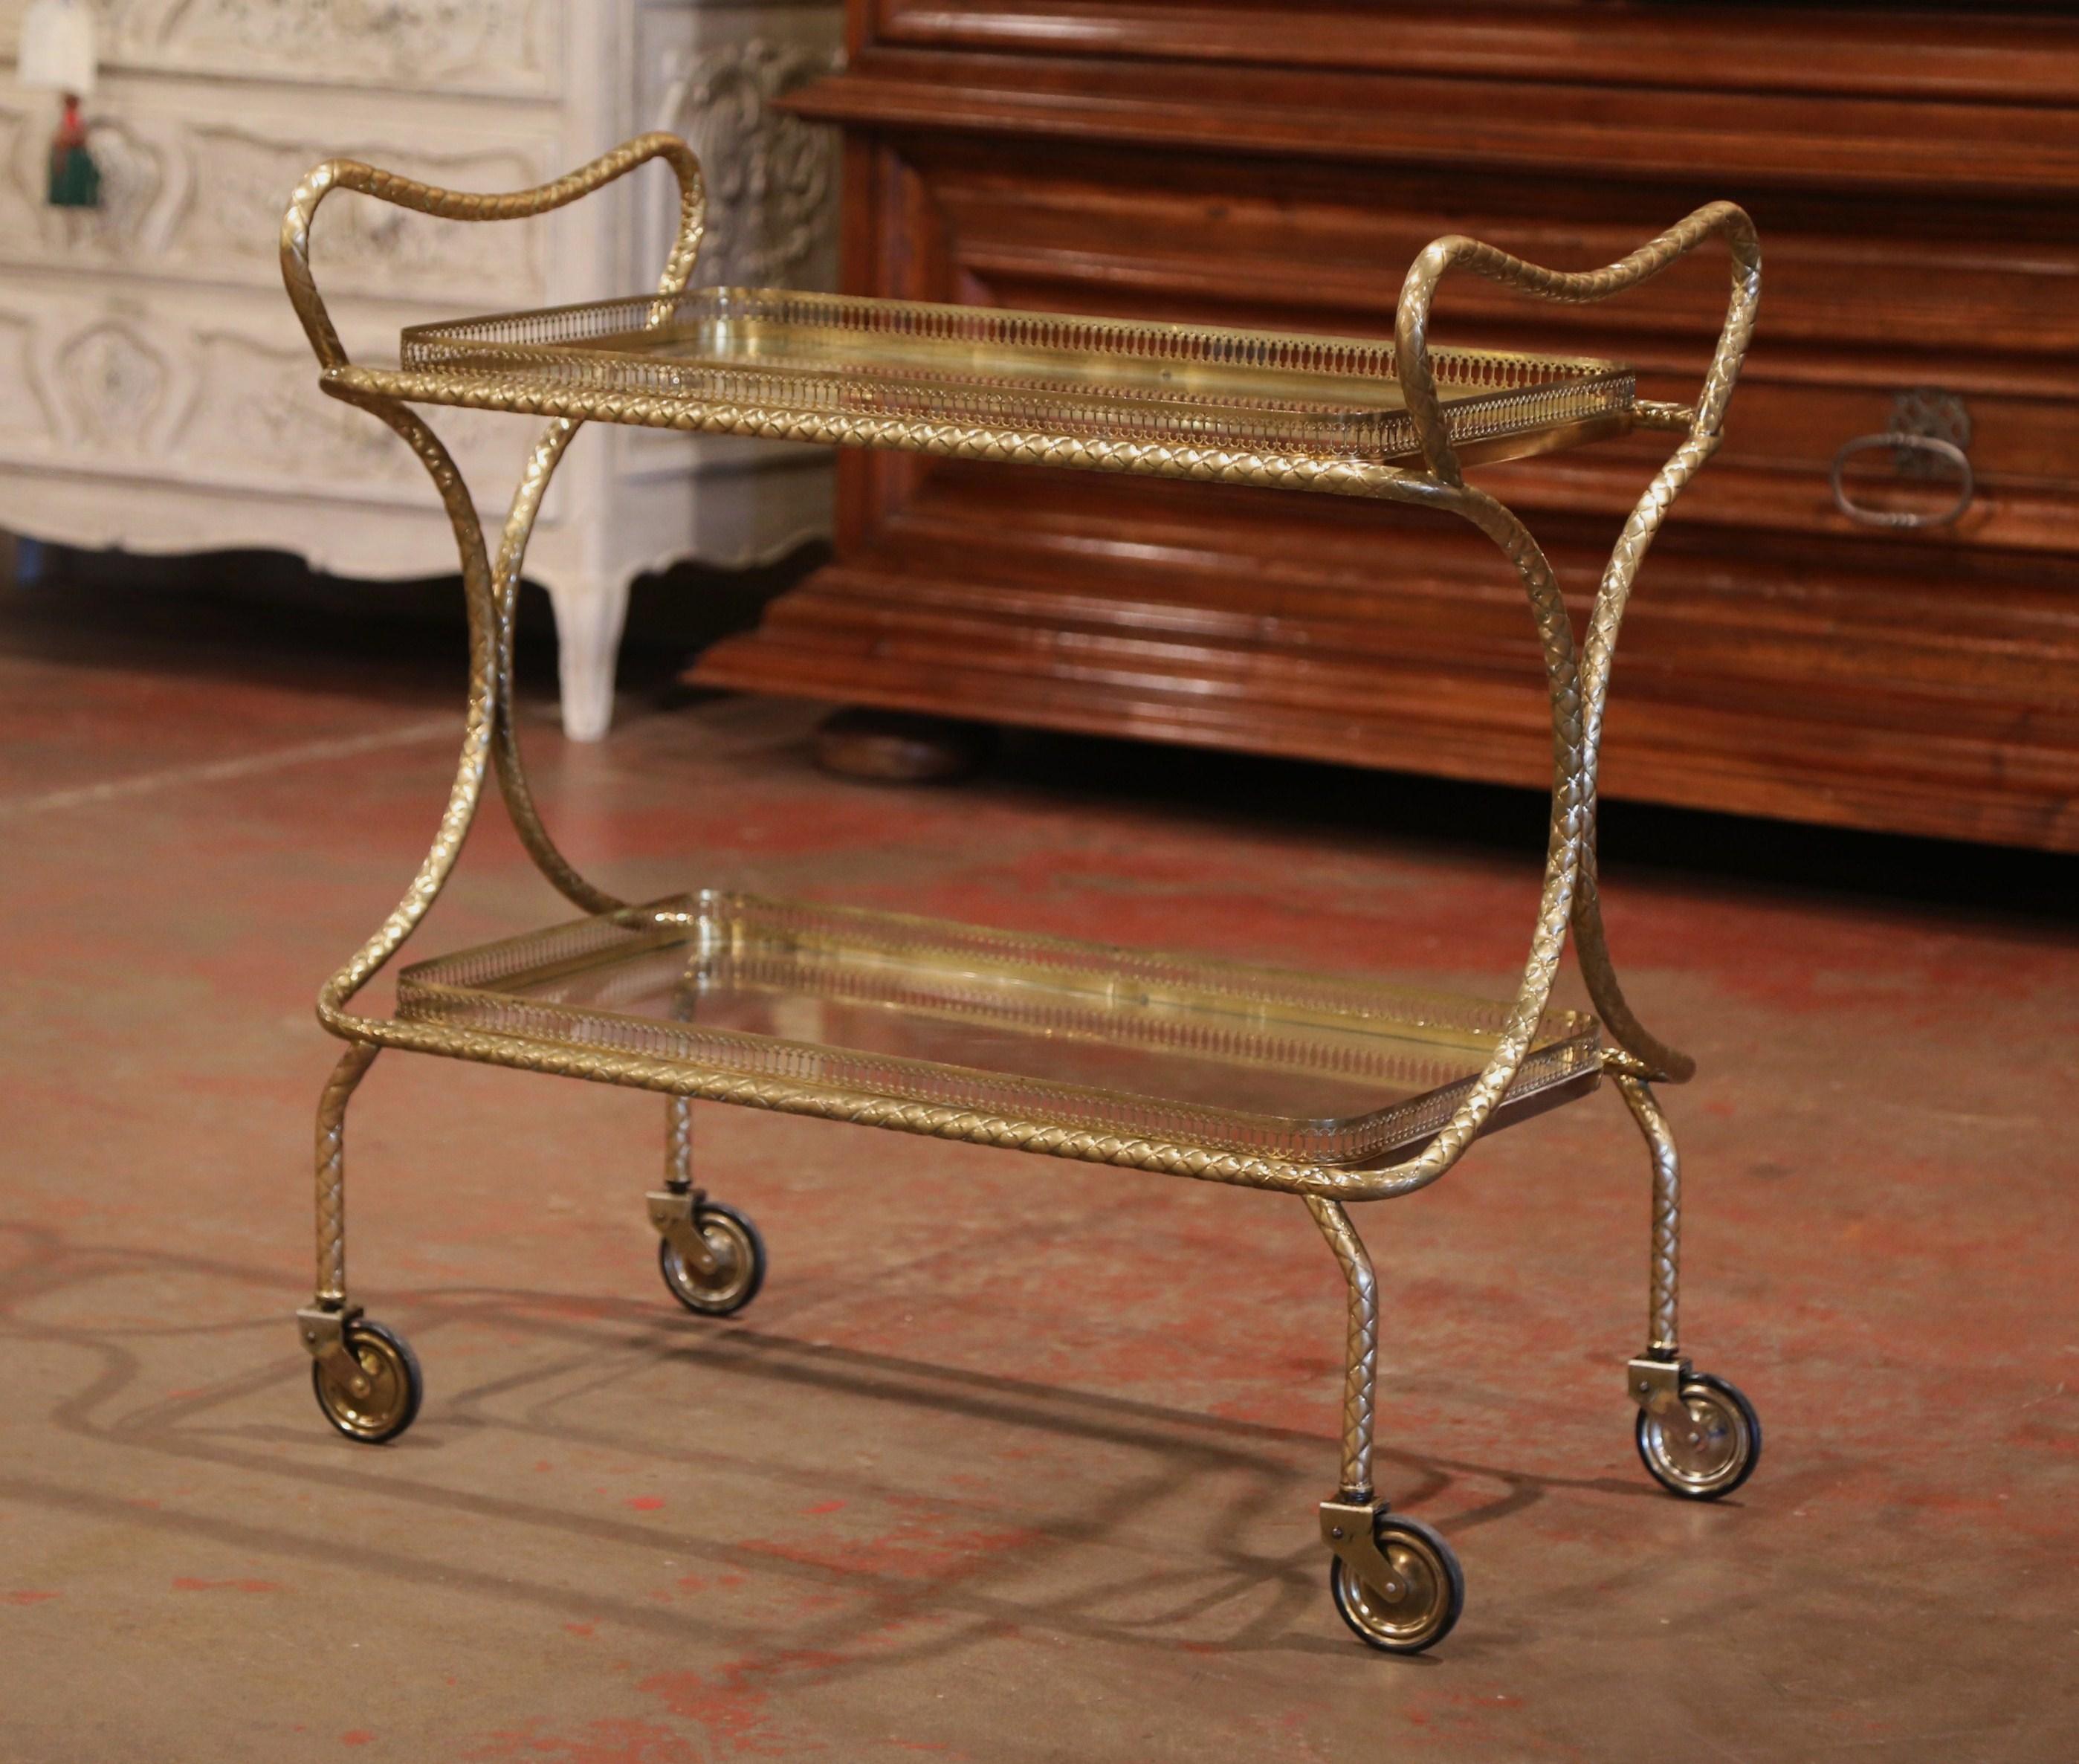 Hand-Crafted Early 20th Century French Brass Bar Cart on Wheels from Maison Jansen